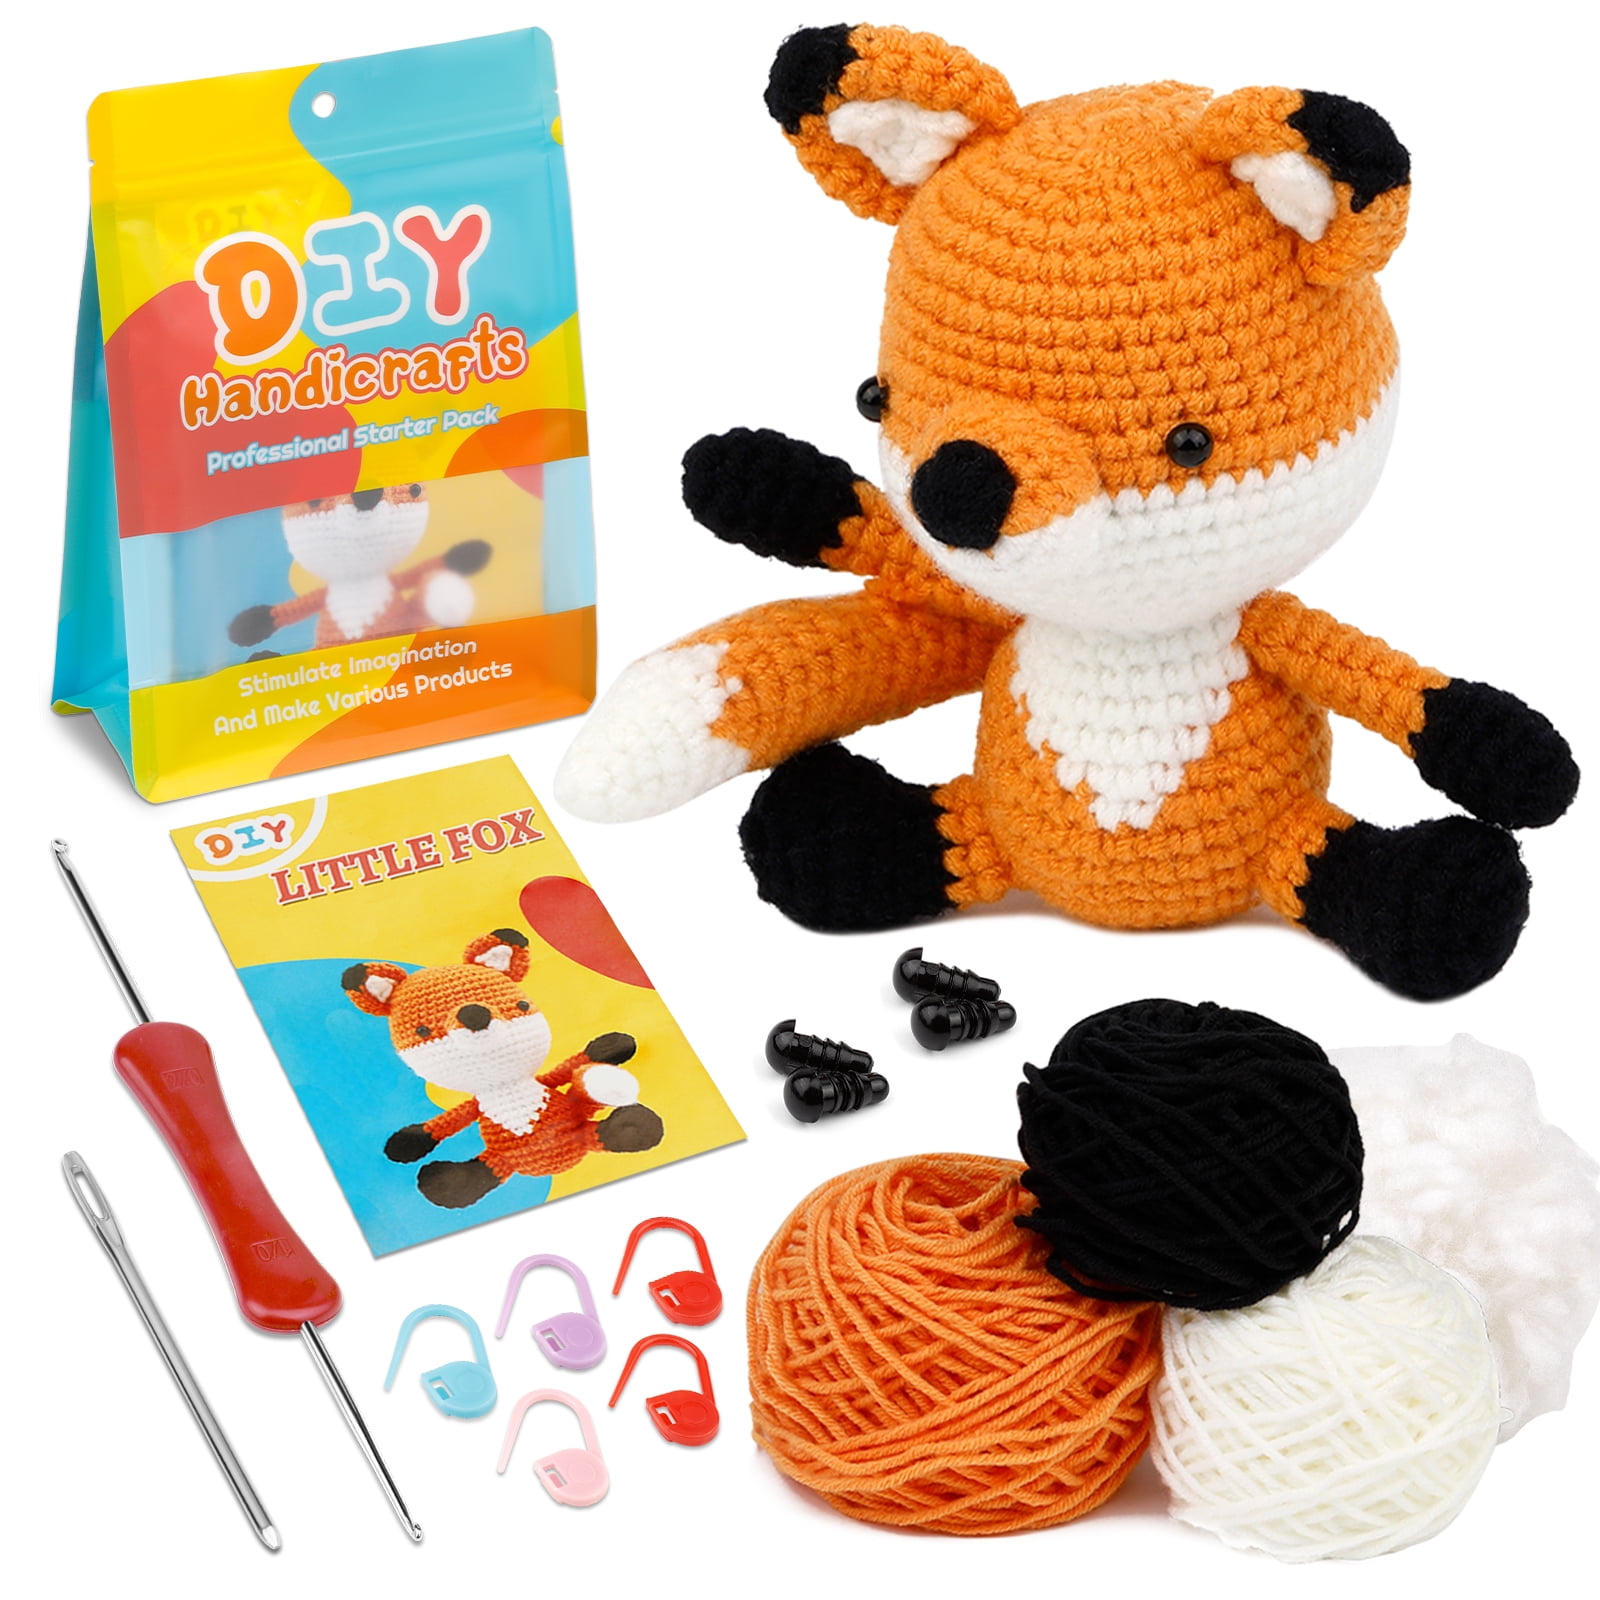  Aeelike Beginner Crochet Kit All in One, Crochet Starter Kit  with Step-by-Step Instructions,Learn to Crochet Animal Kits for Adults and  Kids, DIY Knitting Supplies for Beginners, Cute Cow Family